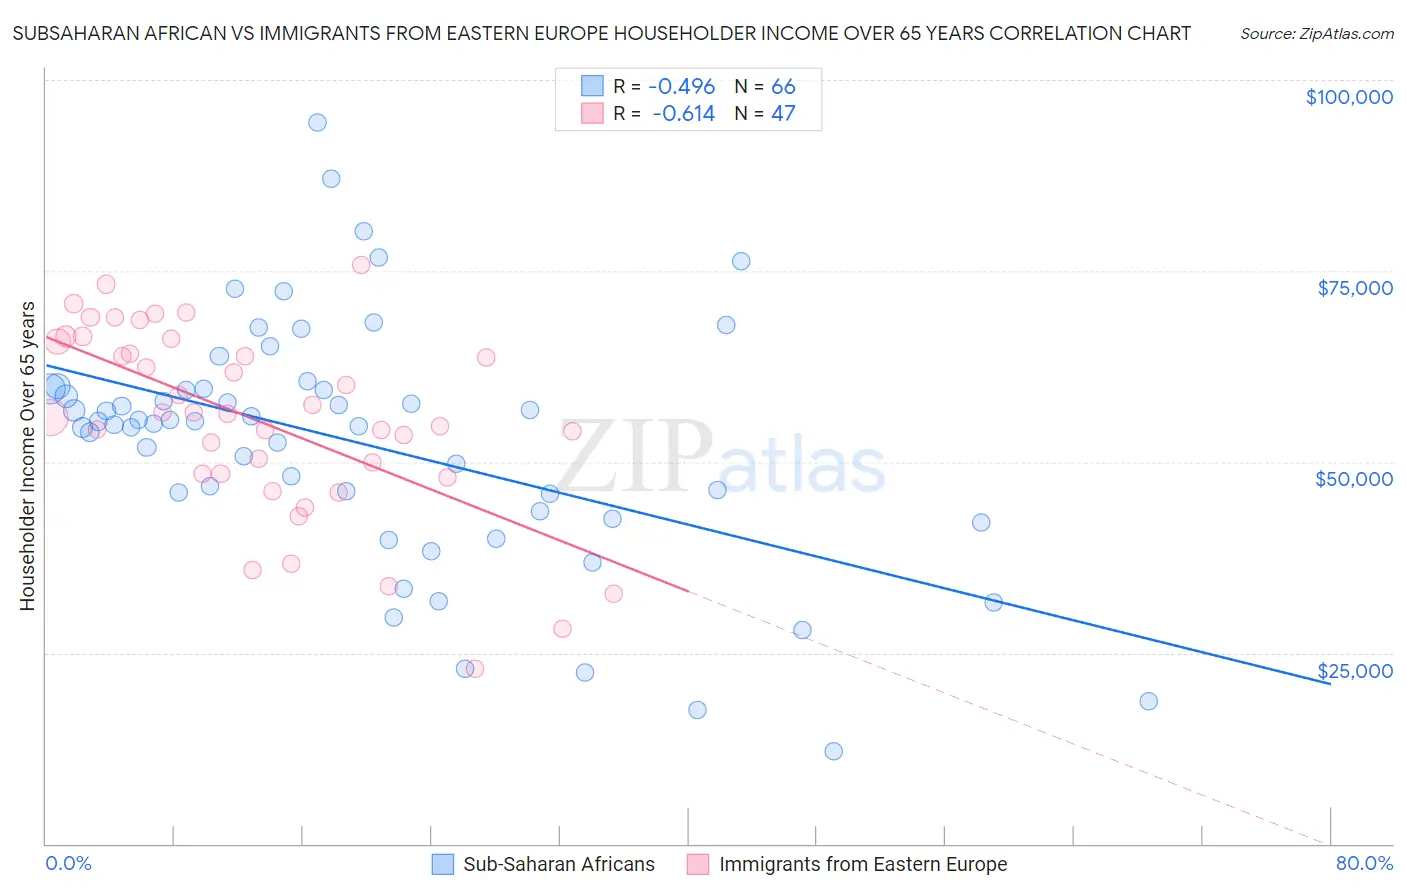 Subsaharan African vs Immigrants from Eastern Europe Householder Income Over 65 years